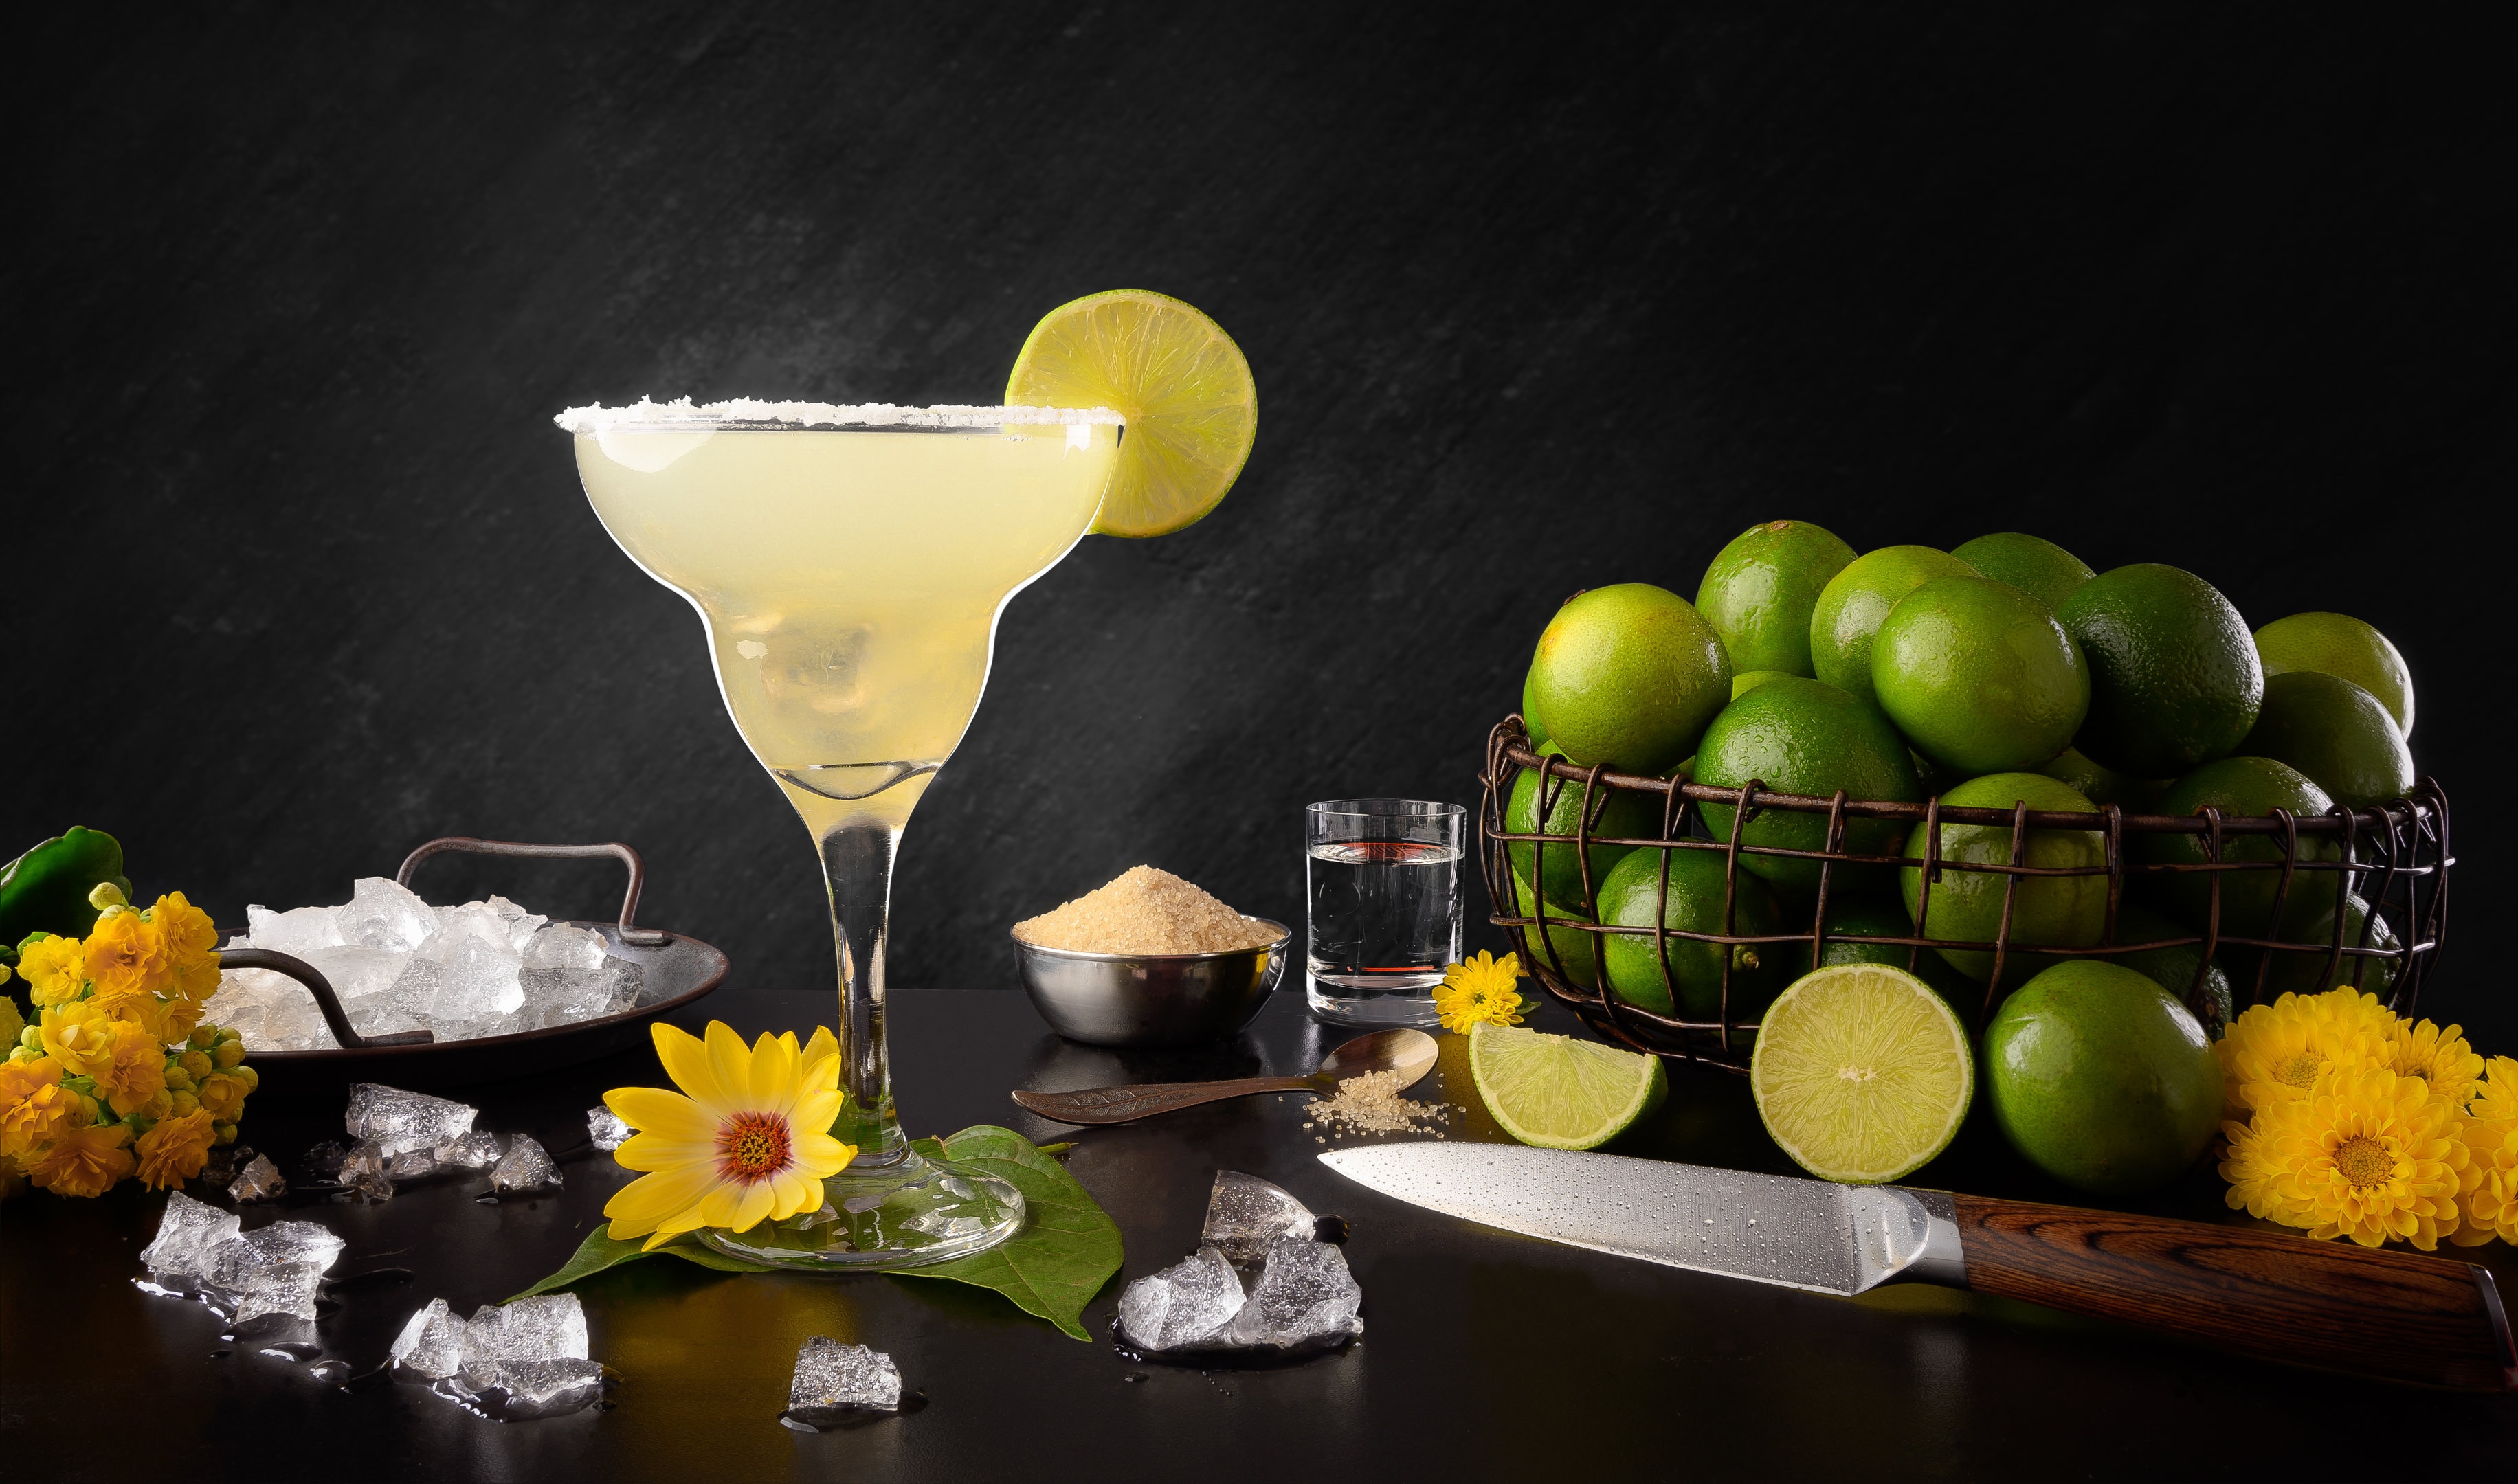 Cadillac margarita with ingredients